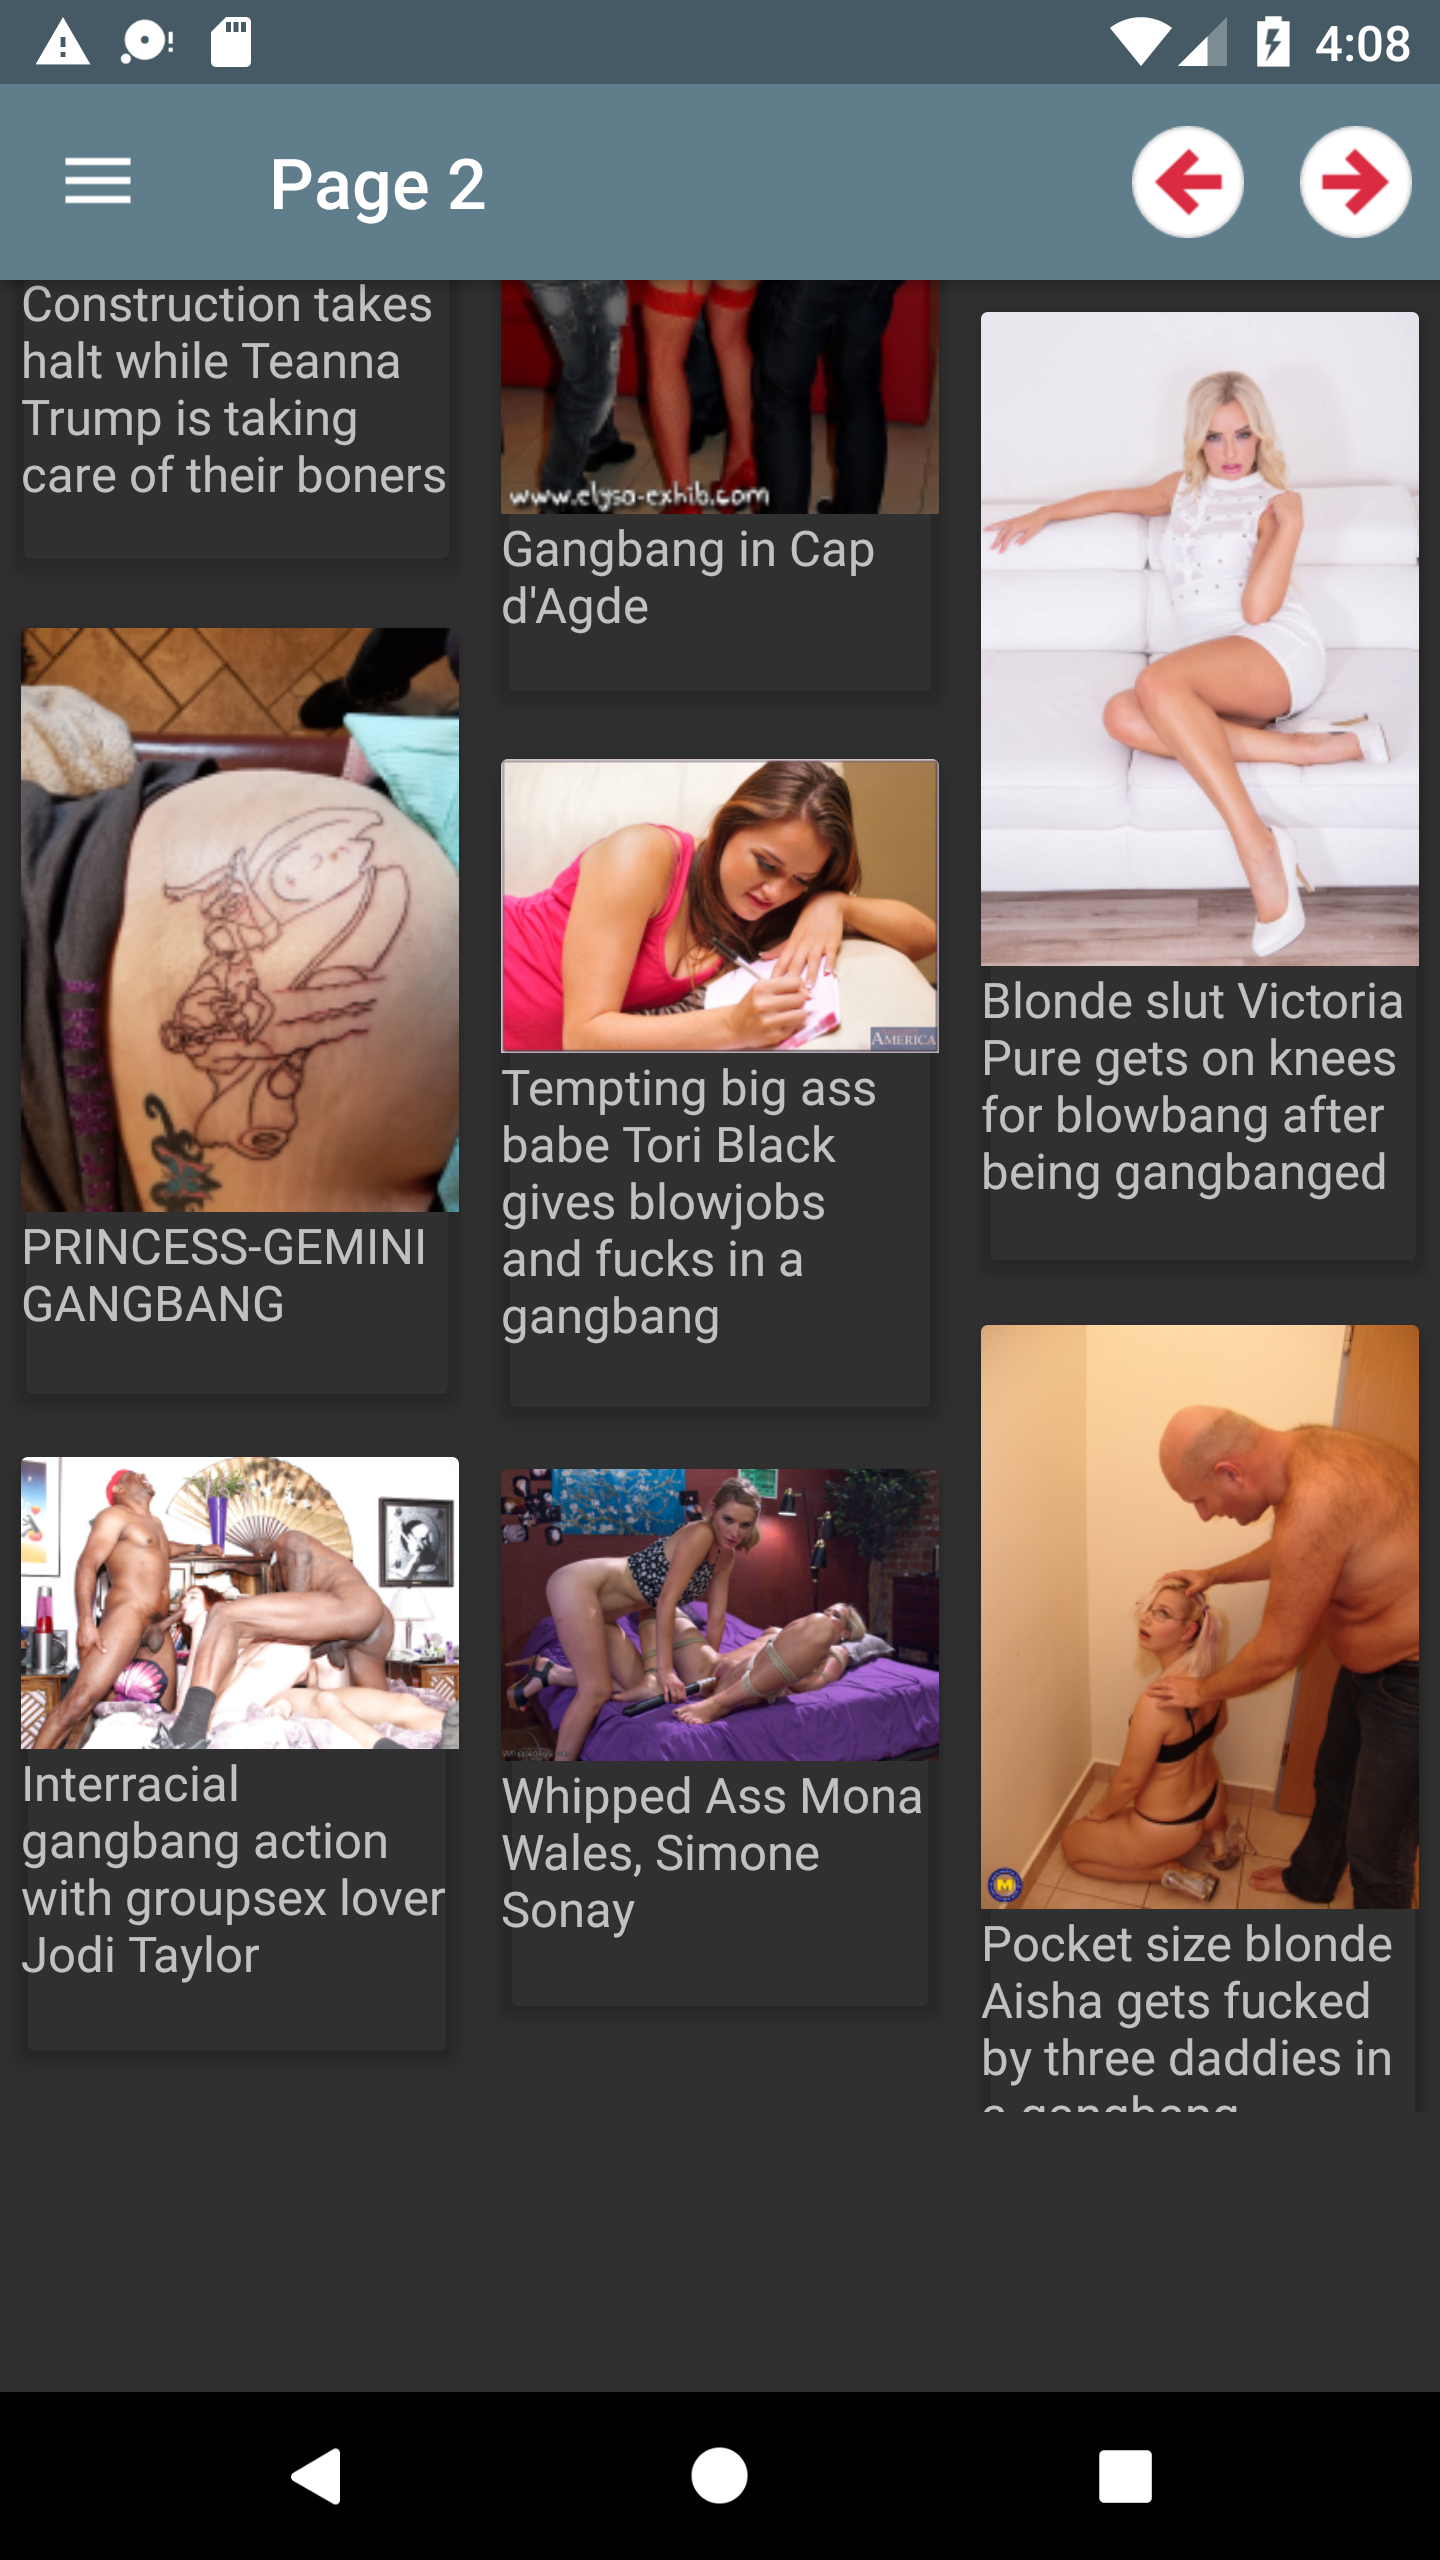 Gangbang Porn galleries,mythras,demonic,porn,shemales,lisa,hot,comics,feast,hentie,pornstars,hentai,where,apk,adult,hntai,fuck,lair,download,pics,immage,apps,collection,sexy,sexpedition,sexyteengalleries